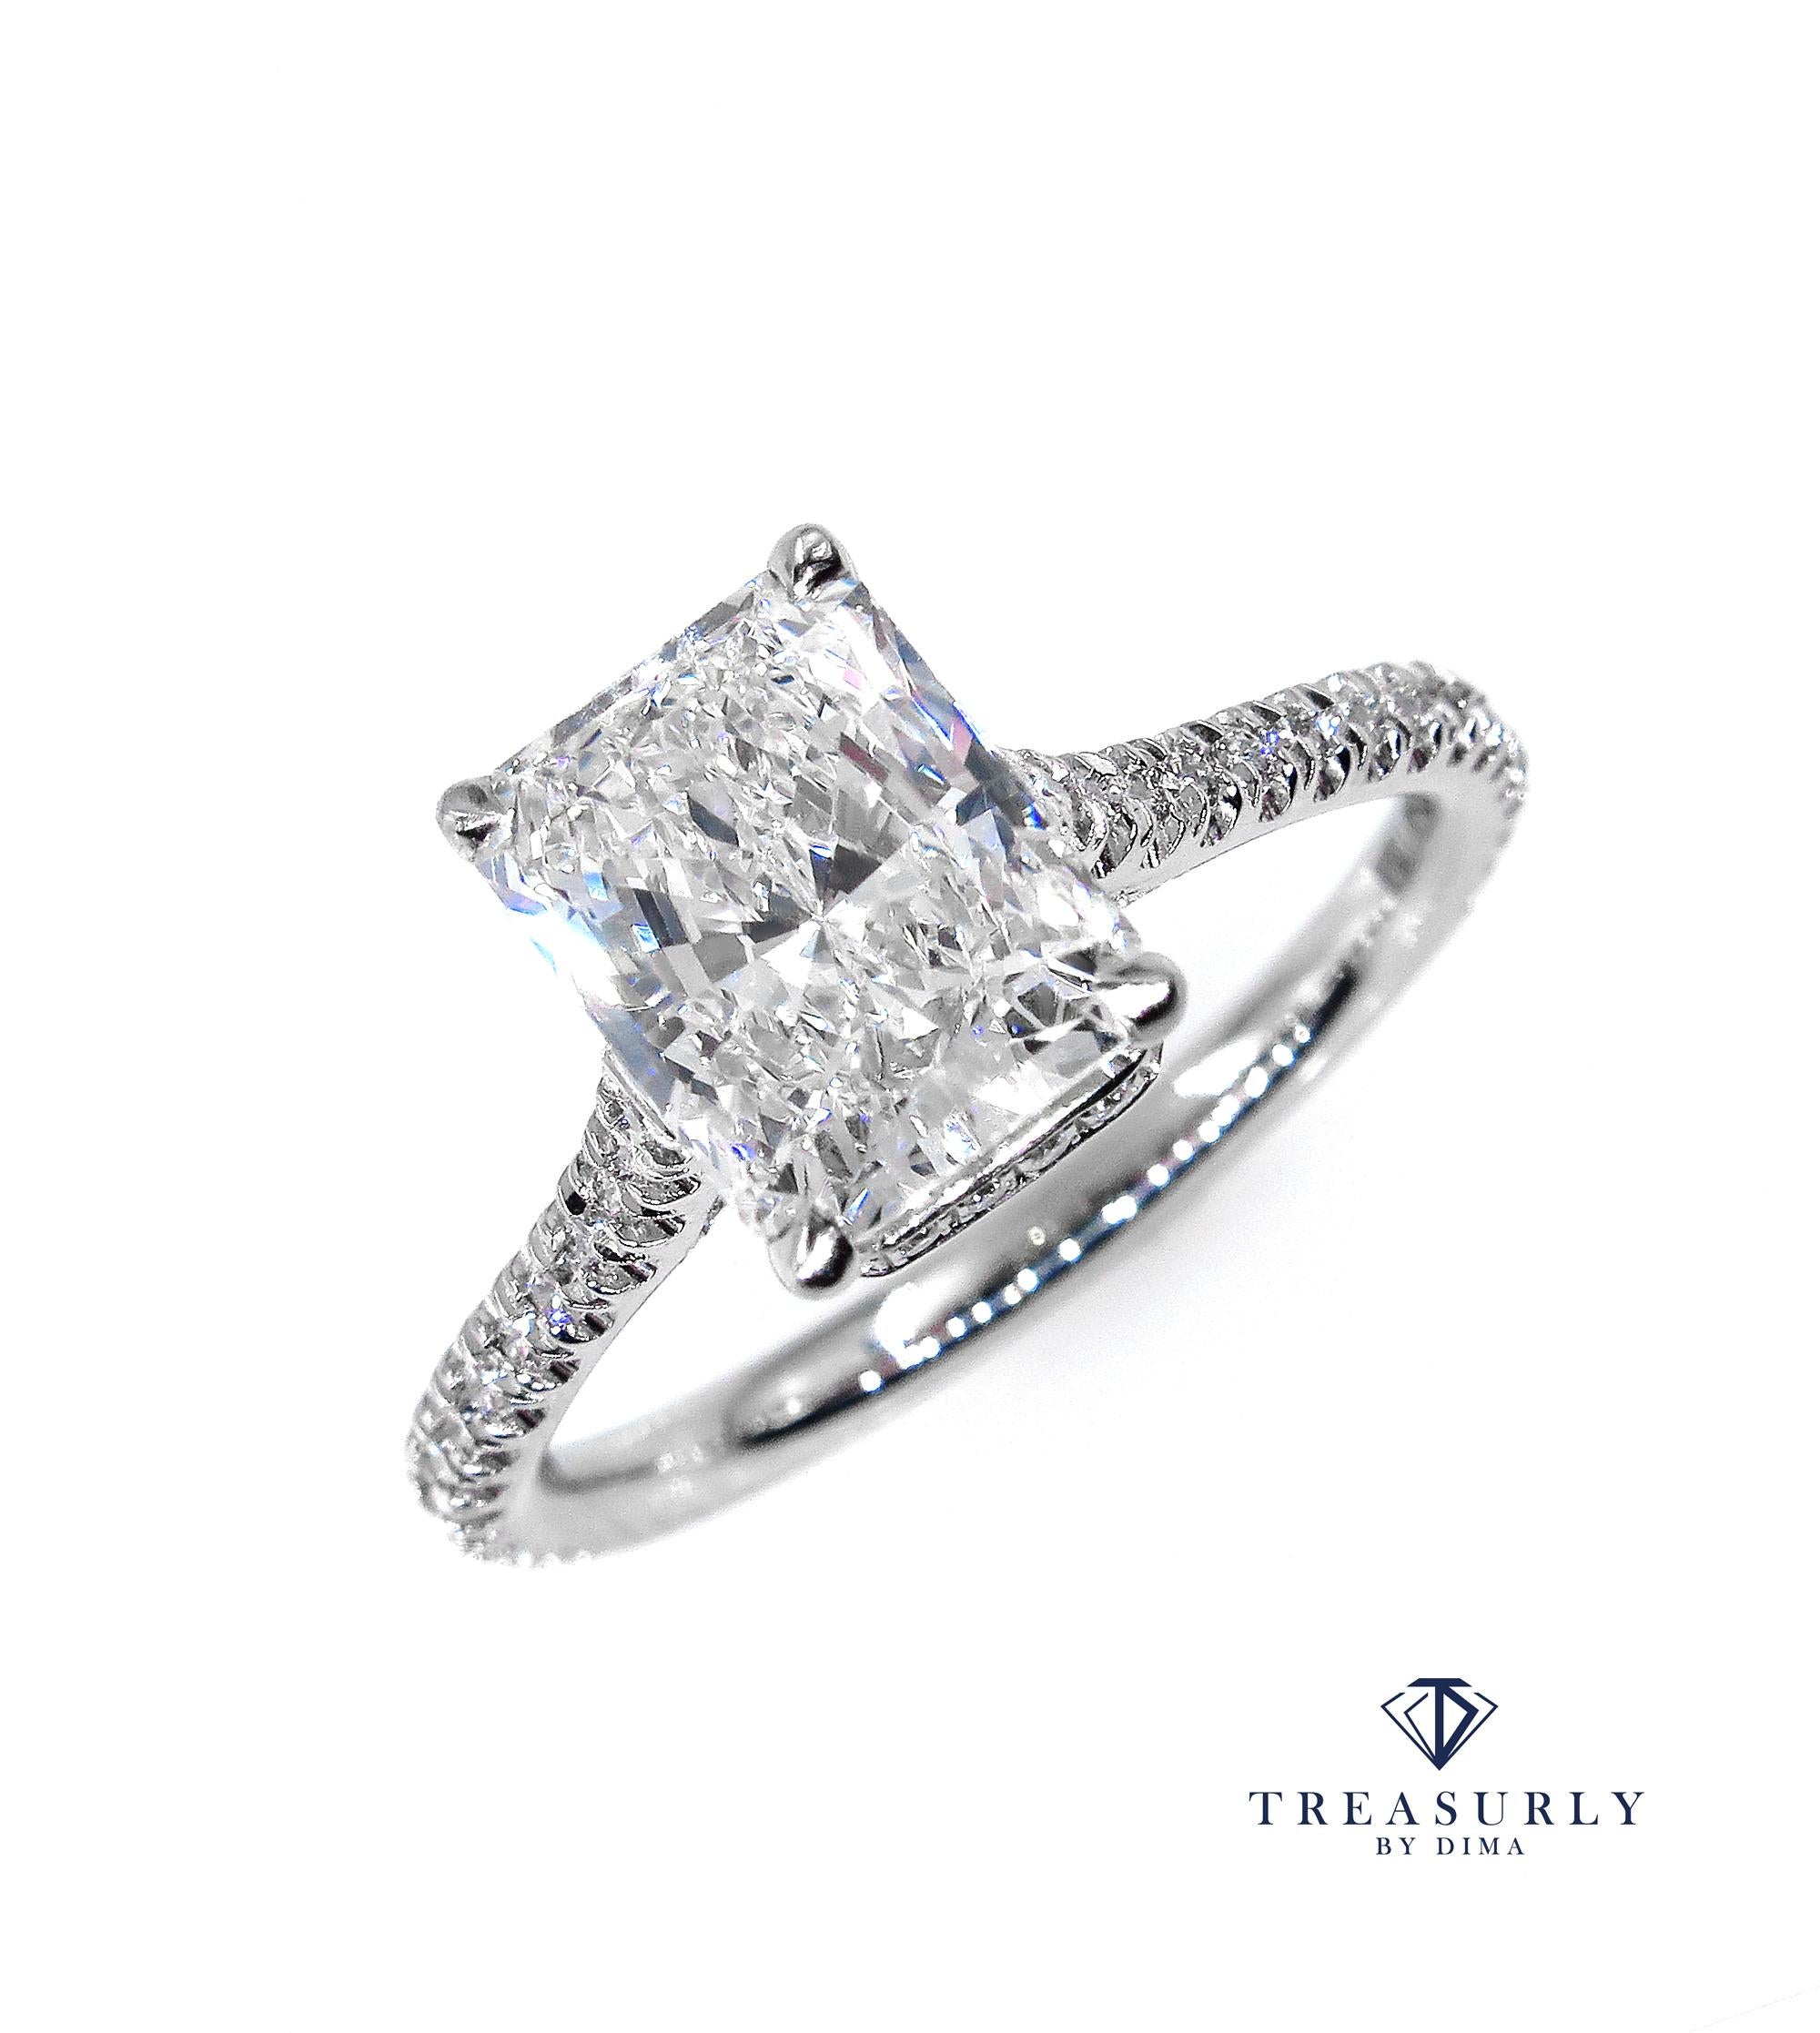 This ring is just breathtaking and SUPER Fine and truly show stopper, 2.01ct in total!
A Beautiful and Elegant Solitaire Elongated Radiant Cut Diamond Ring with 1.71ct GIA CERTIFIED I Color VS1 Clarity (Near-colorless, eye clear), 100% NATURAL. The